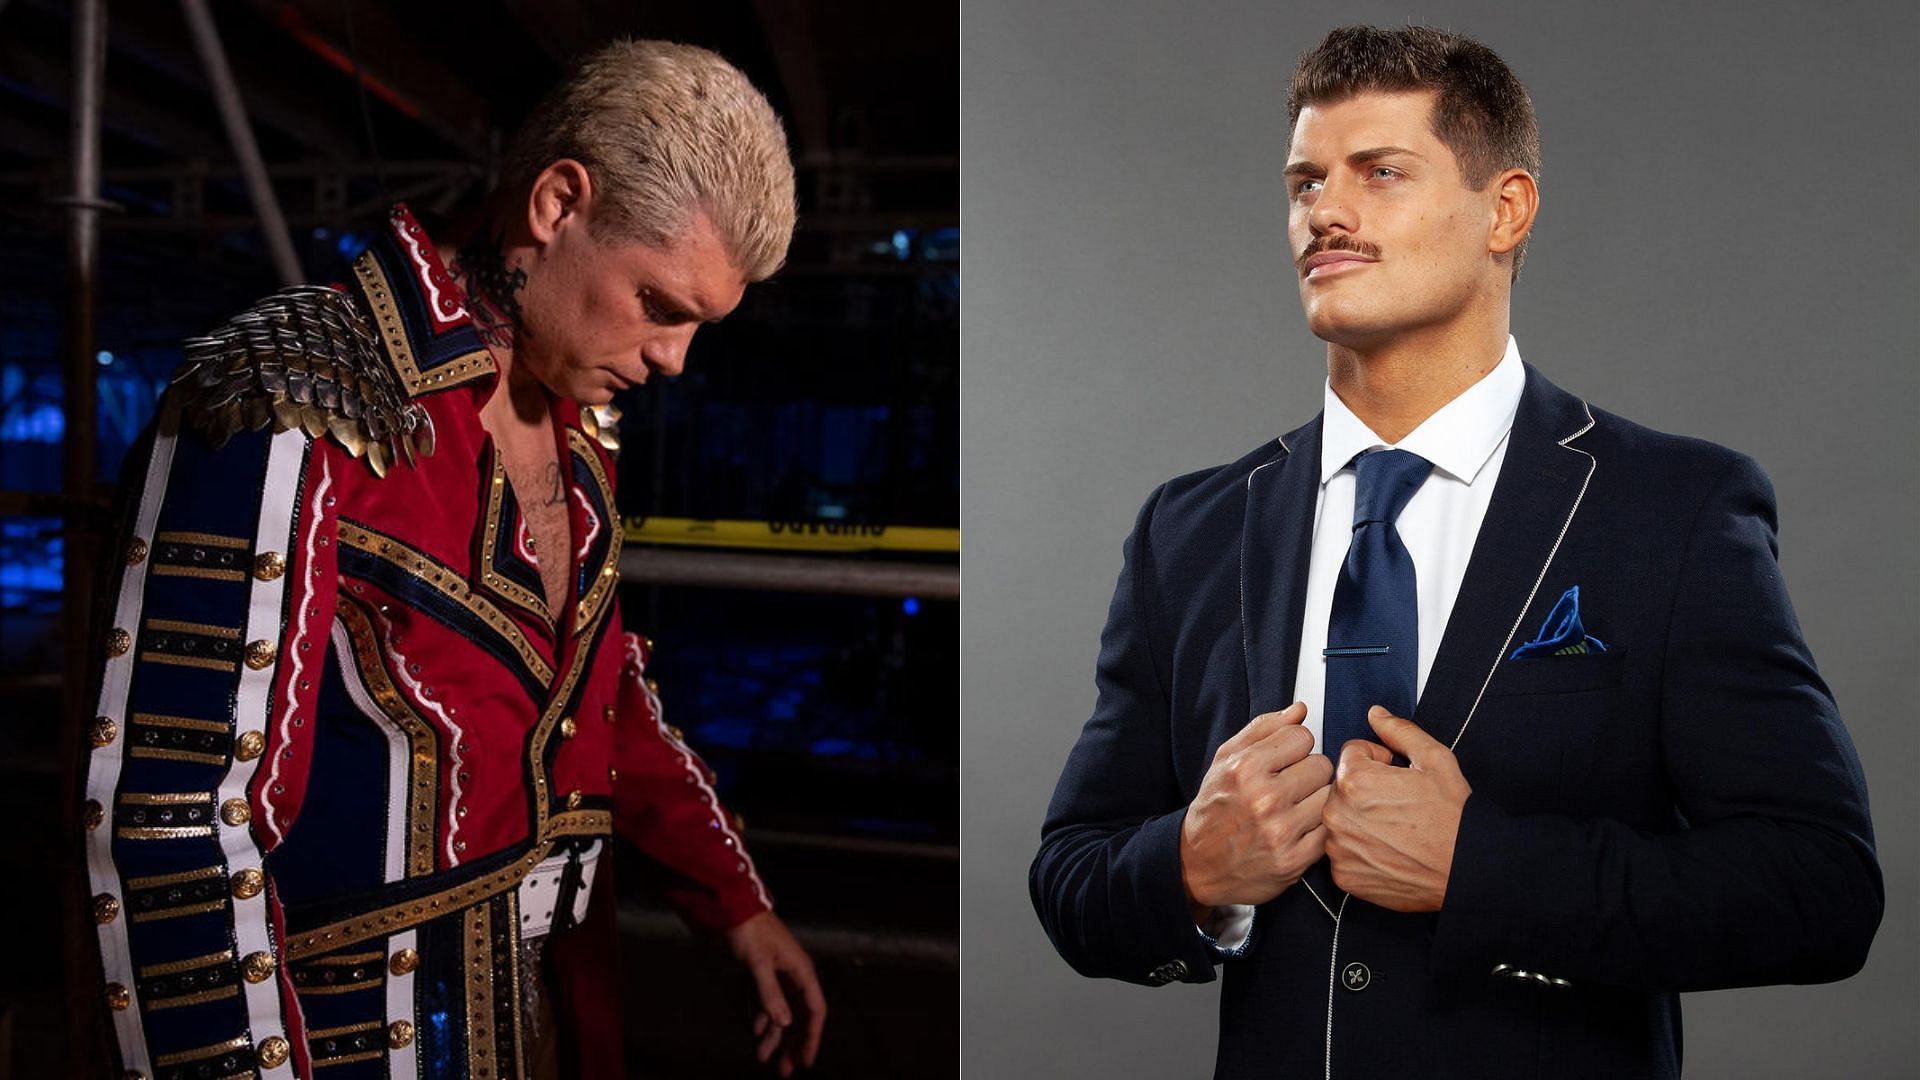 Cody Rhodes is determined to become a world champion